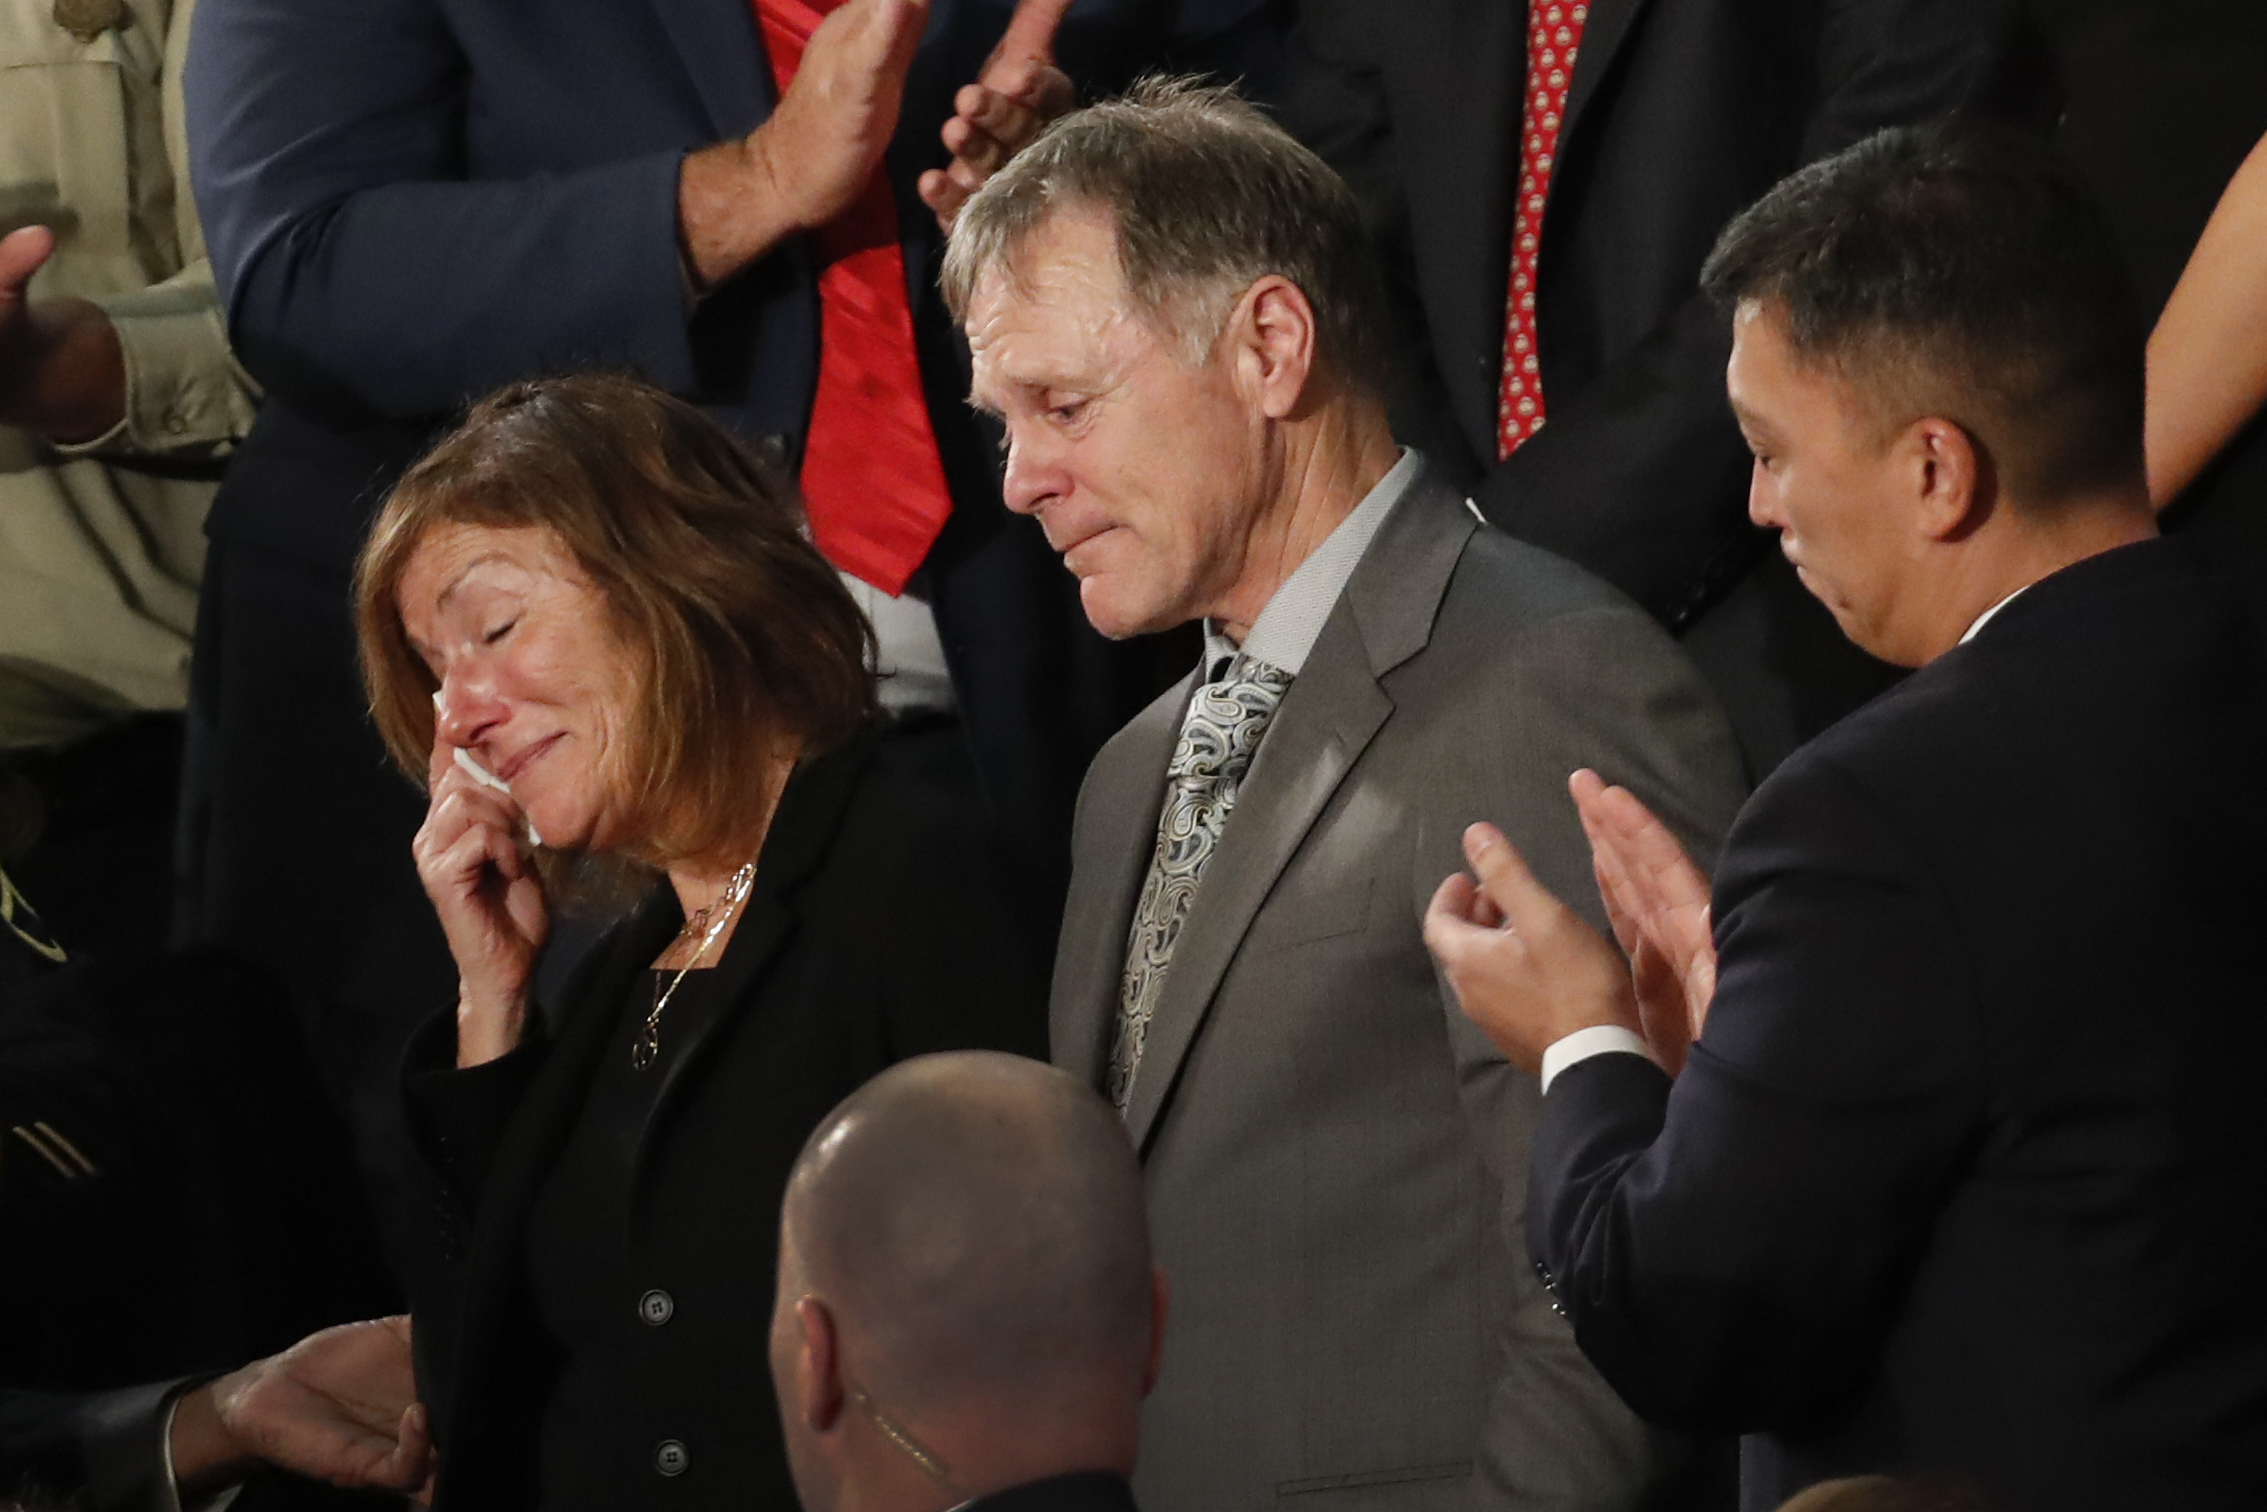 PHOTO: The parents of Otto Warmbier react to a standing ovation during State of the Union address to a joint session of Congress on Capitol Hill in Washington, D.C., Jan. 30, 2018.